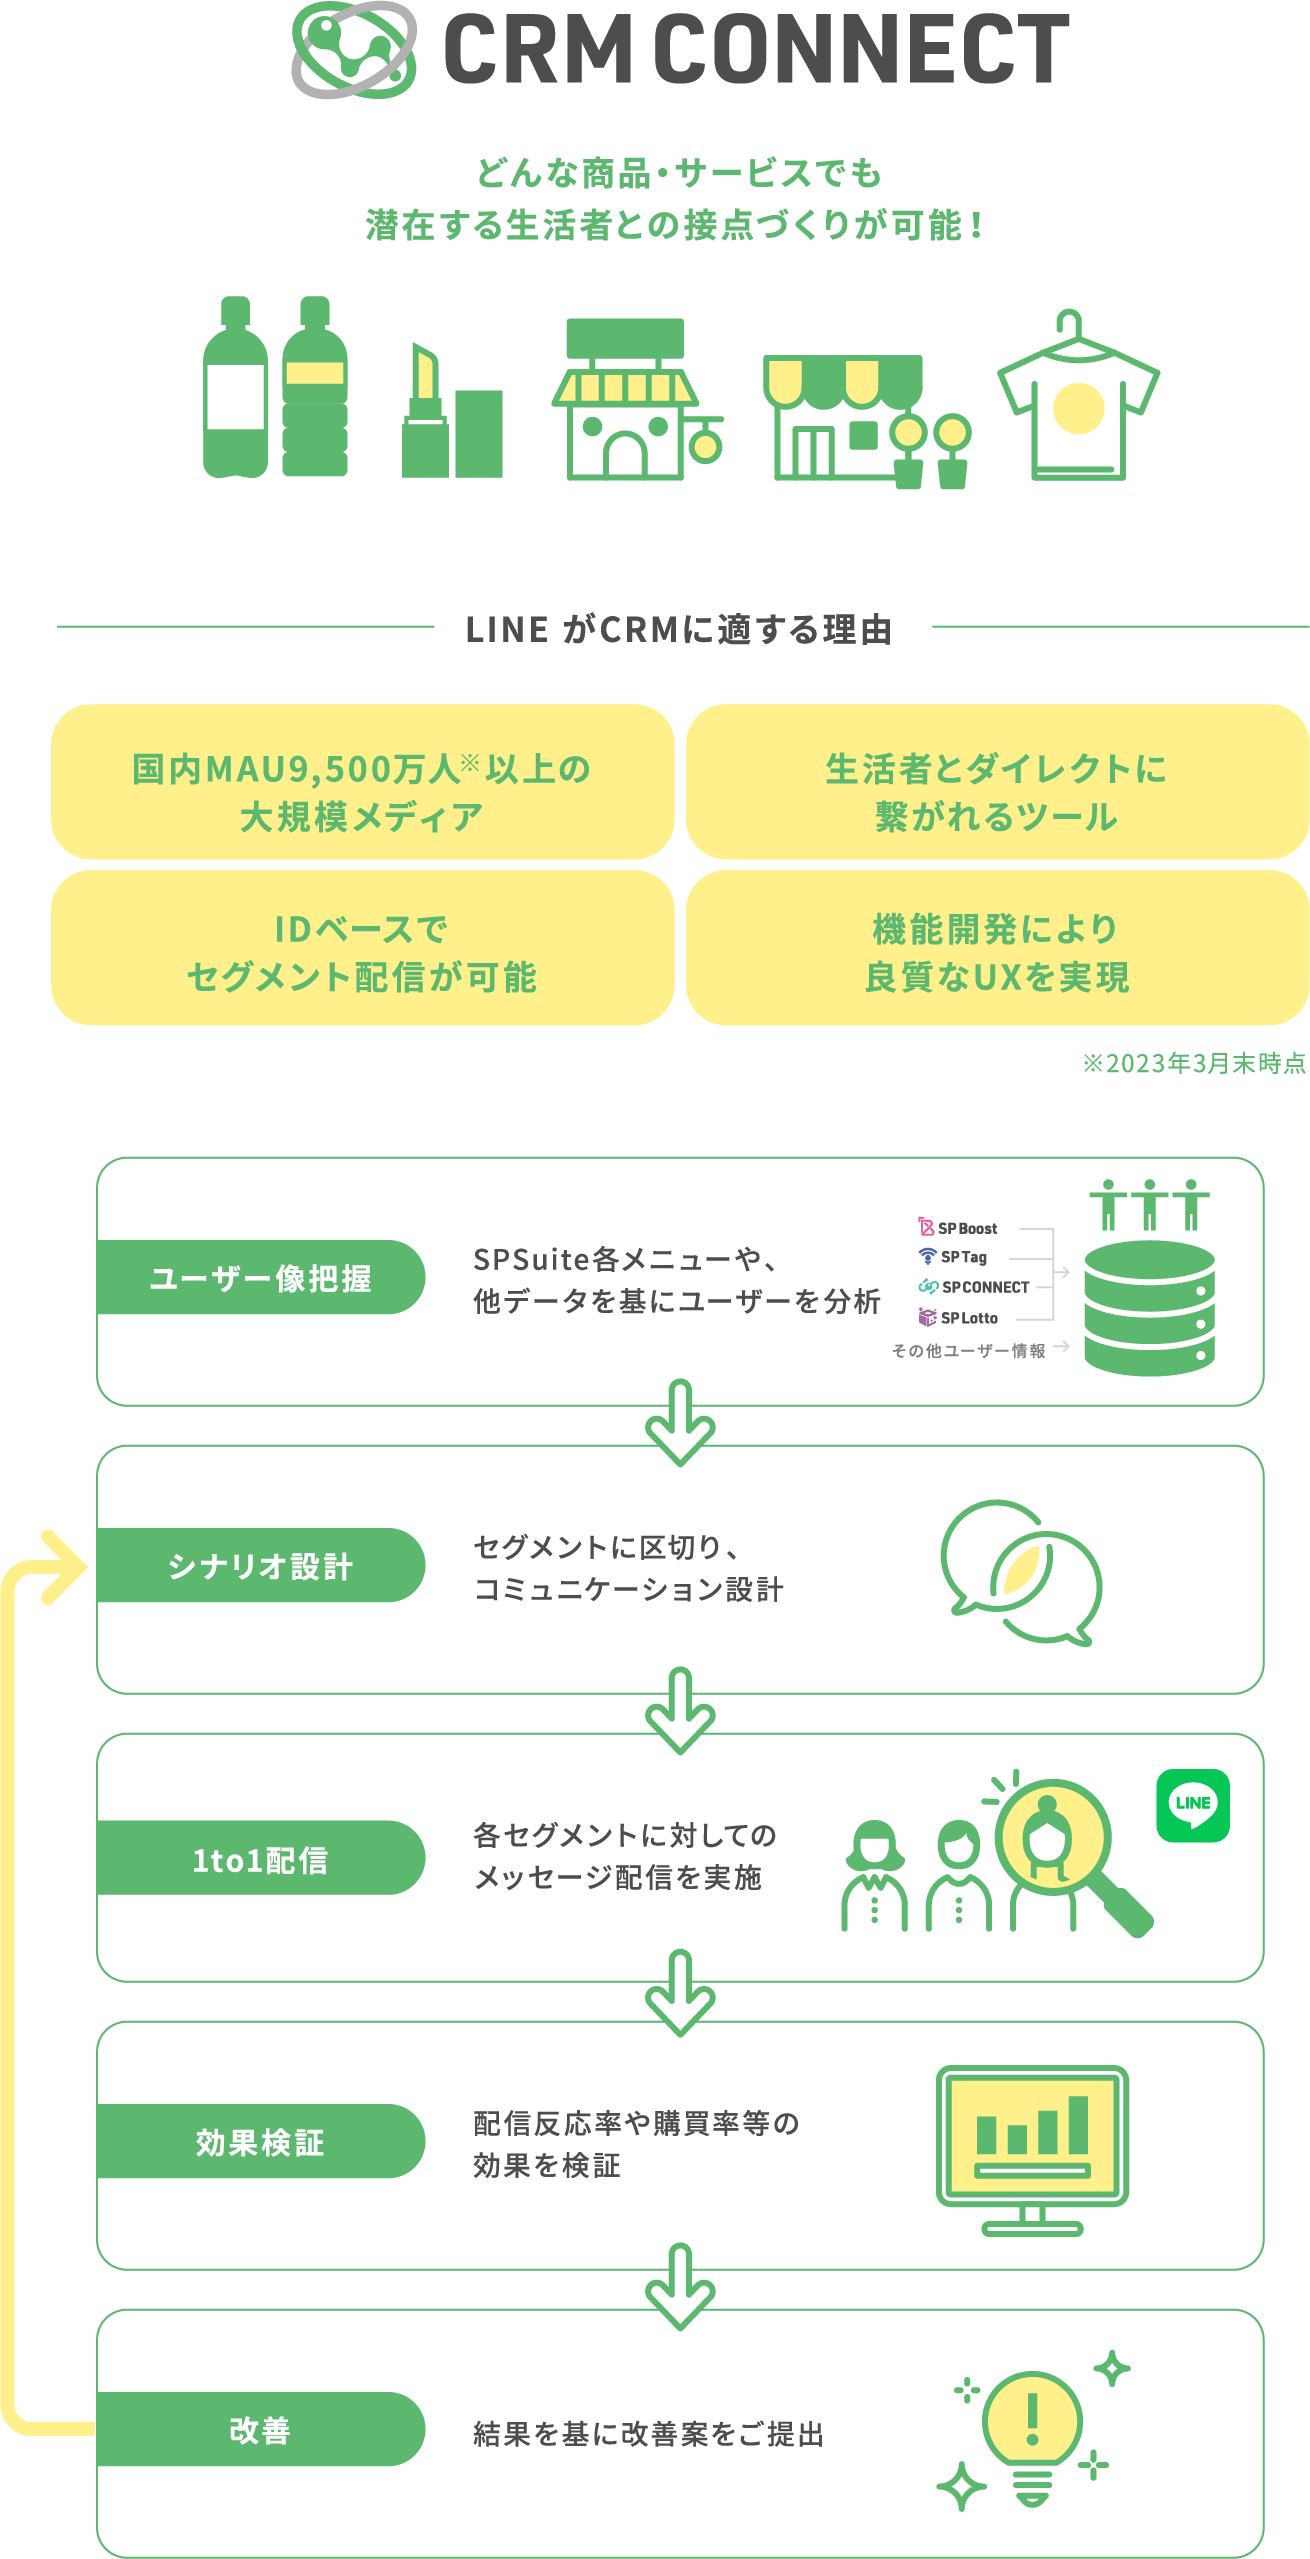 CRM CONNECT